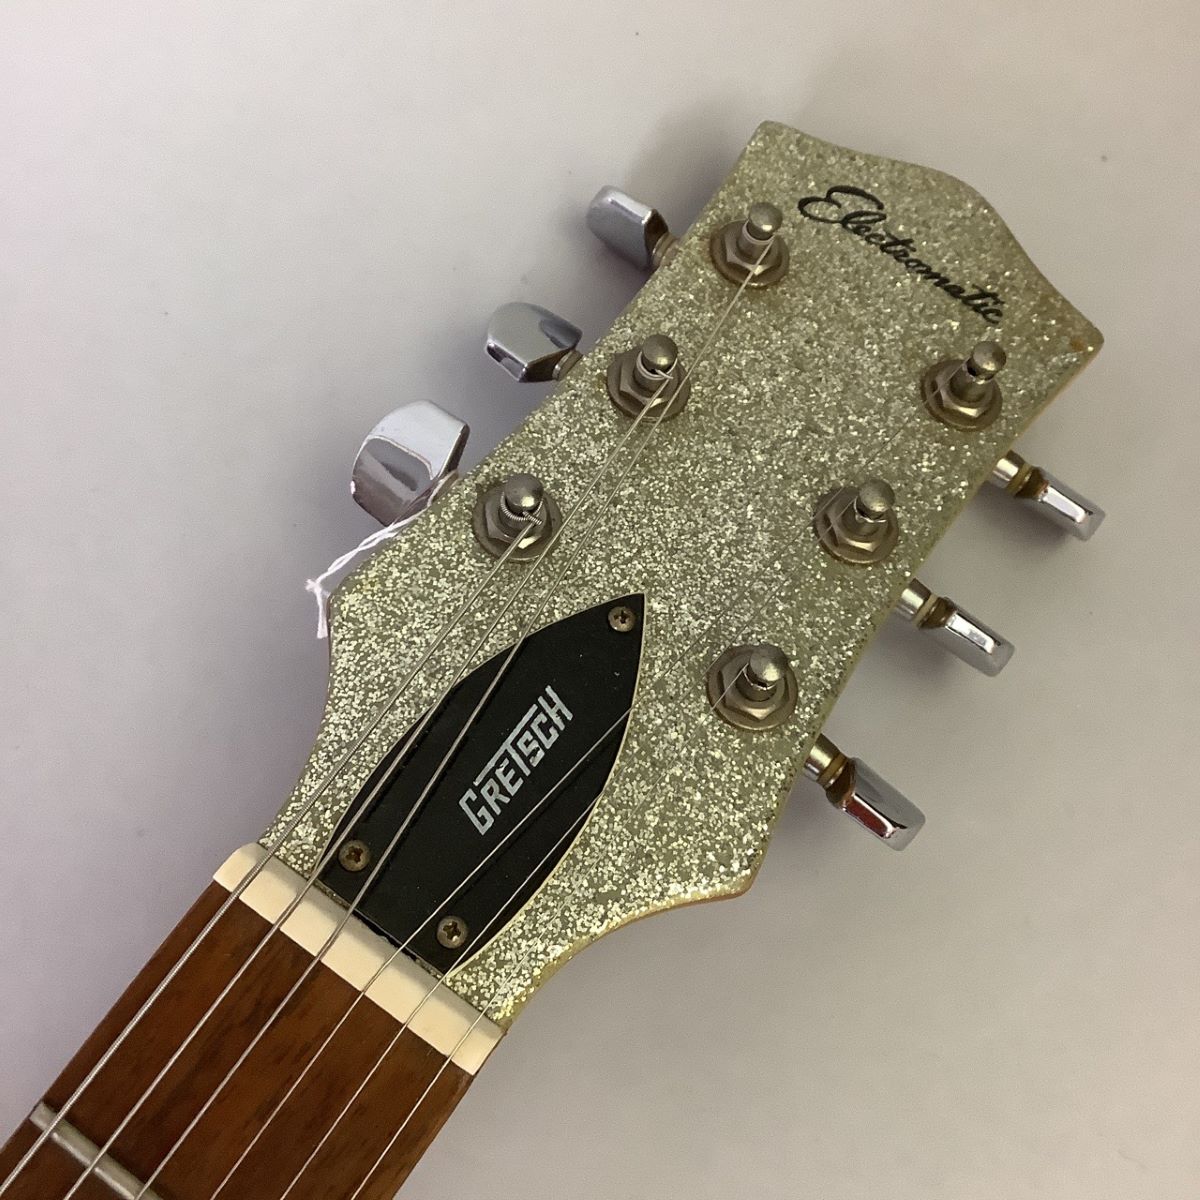 Gretsch Electromatic Electromatic G2626 Silver Sparkle グレッチ